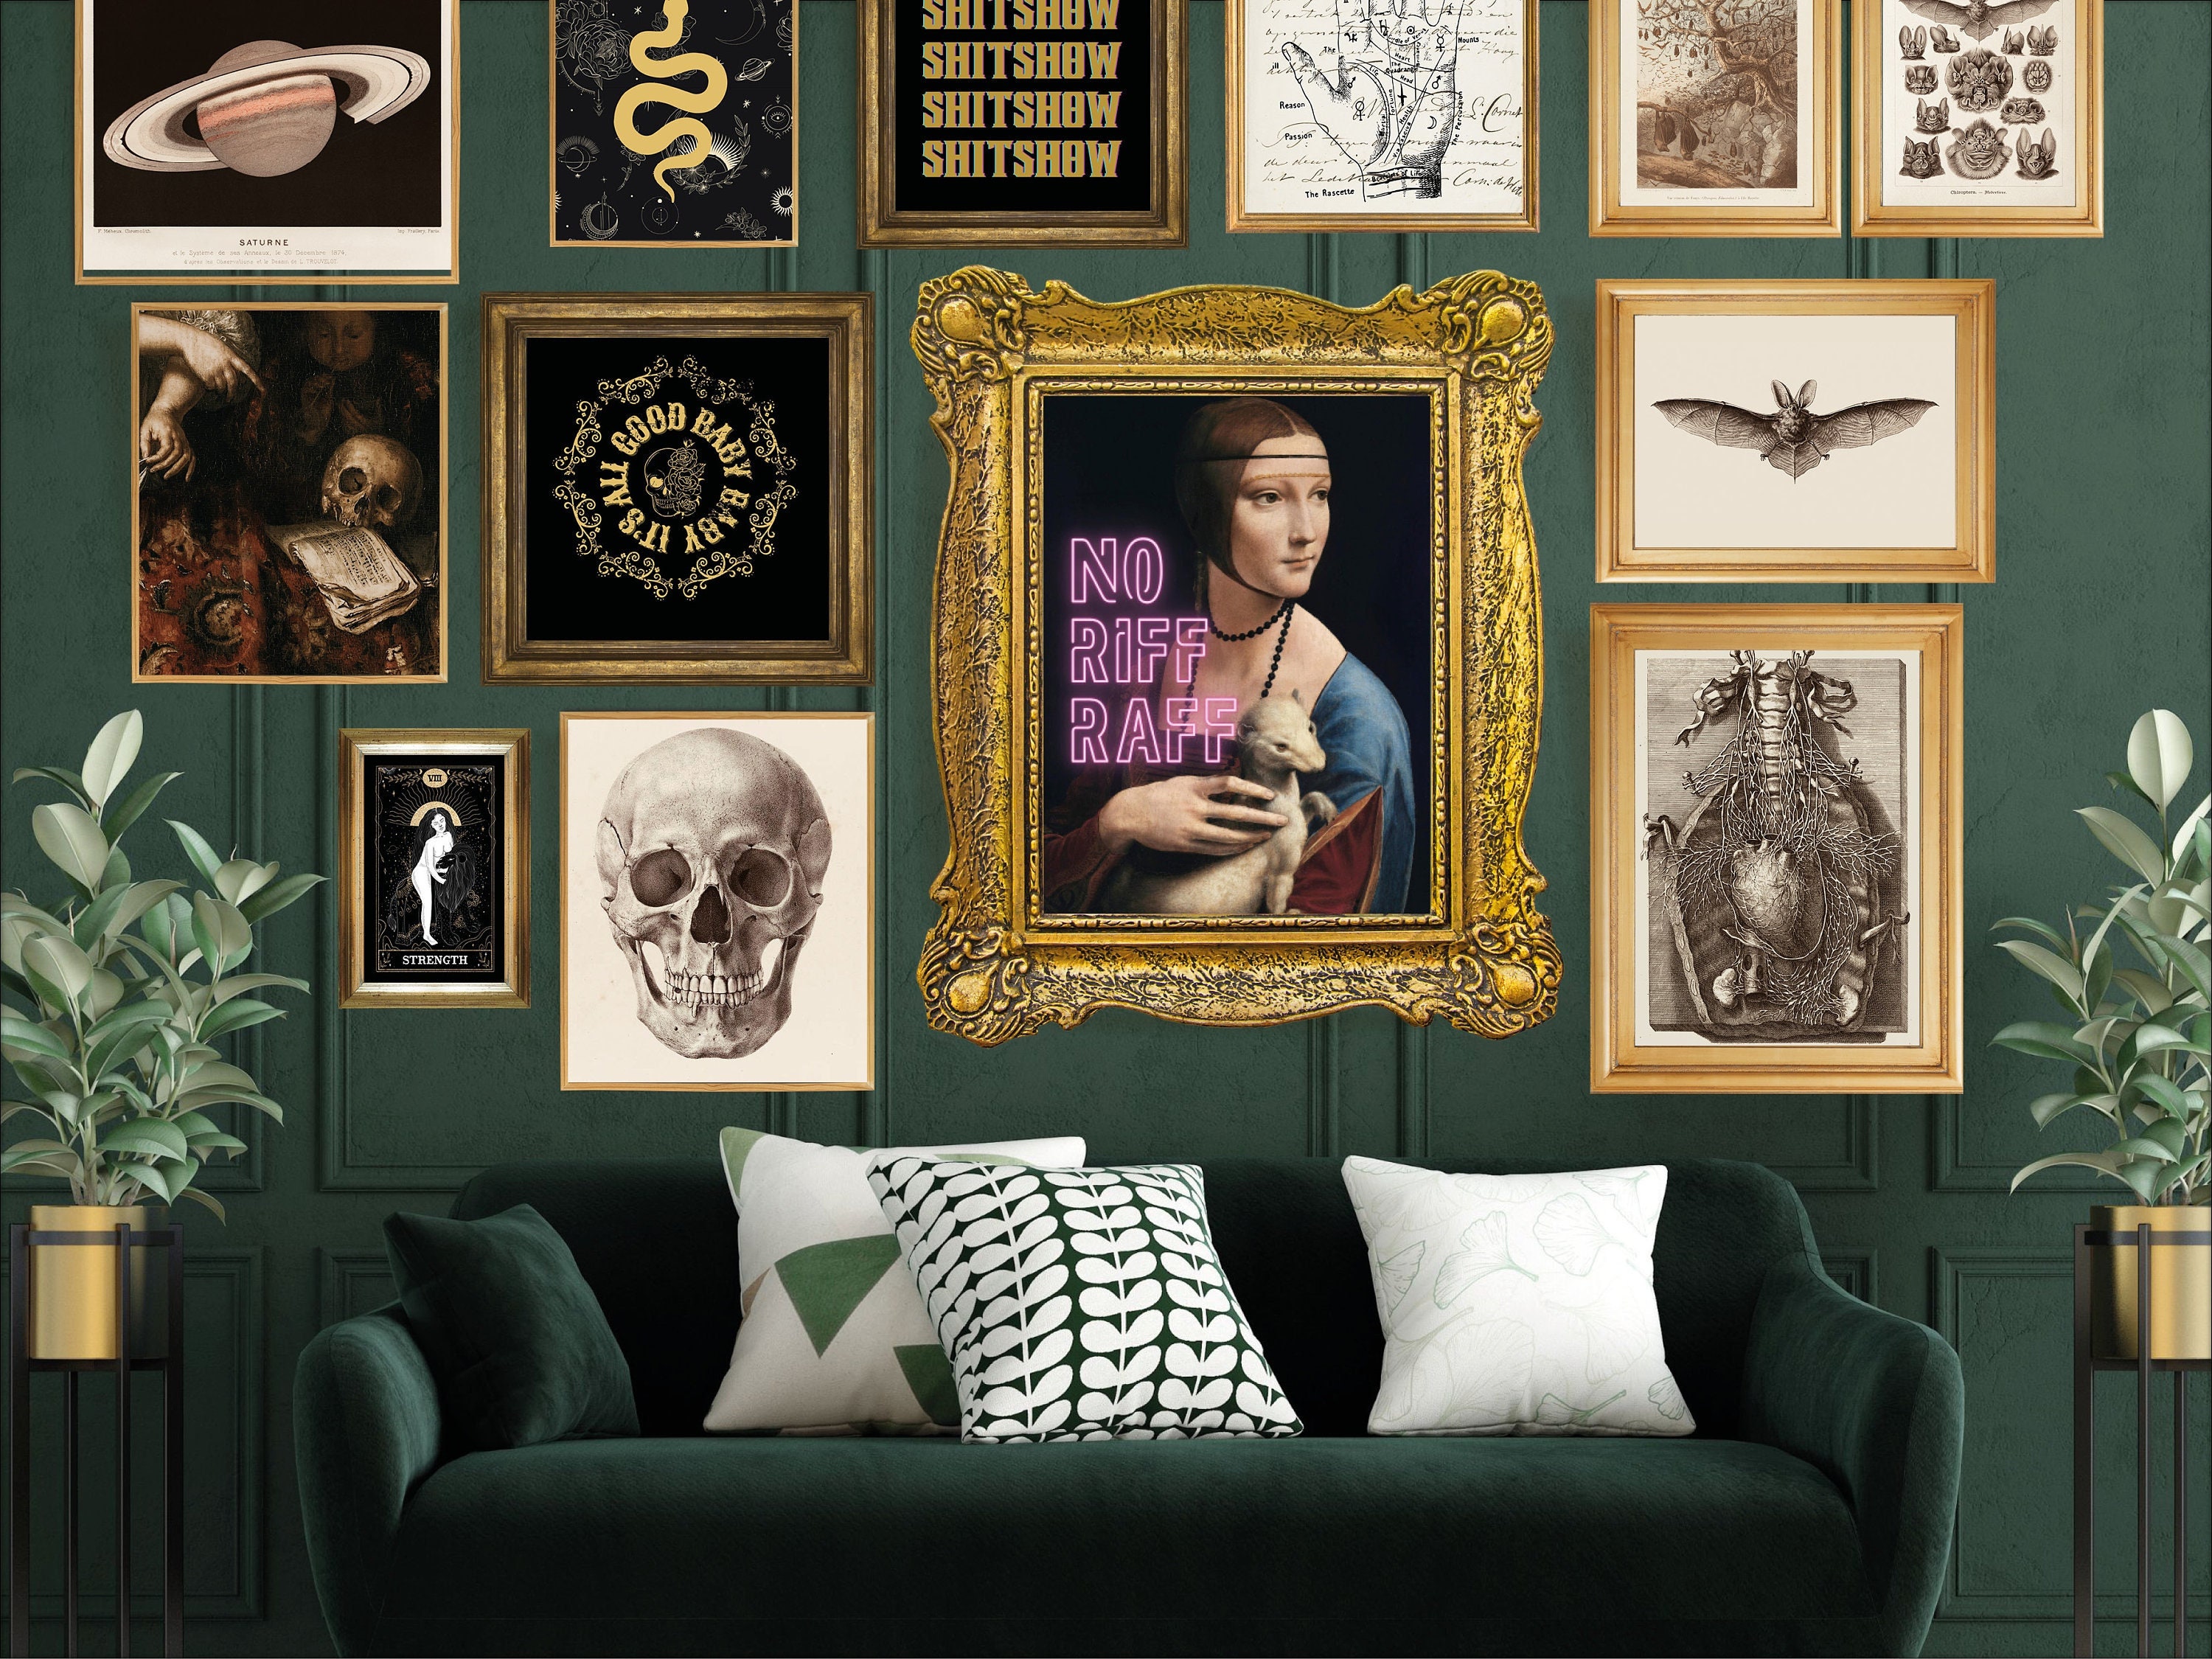 Maximalist Decor With Altered Art Eclectic Wall Art Prints - Etsy ...